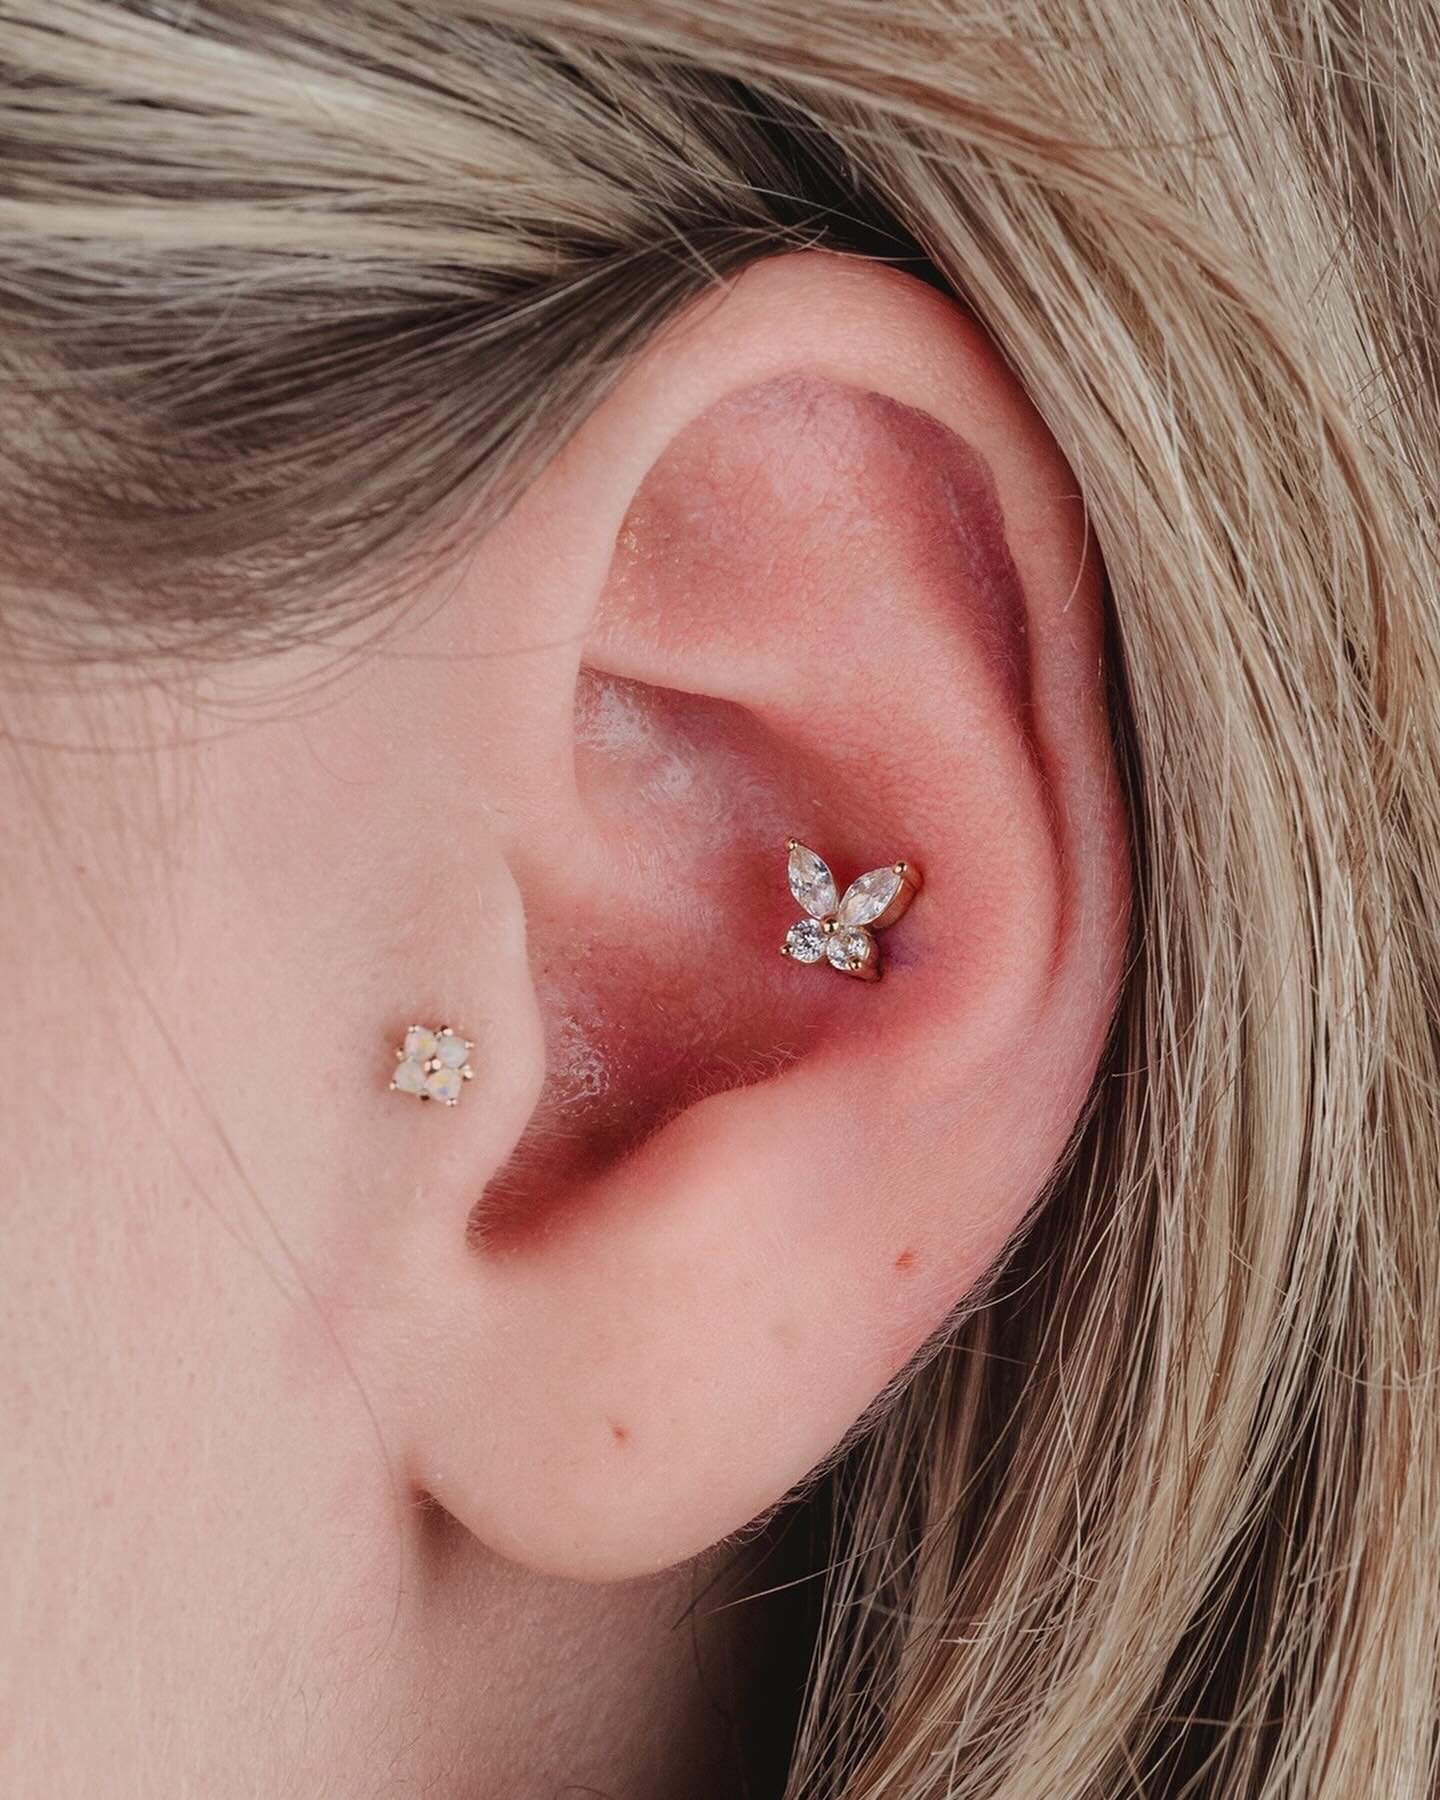 IN THE🌤️
 
WANING GLOW
 
A sparkling conch for Beth performed by Tanner with this &ldquo;Flutterby&rdquo; end from Junipurr, to start a sunny day off right🦋we all love the shine of this piece and it founds its way into a great spot✨
⠀⠀⠀⠀⠀⠀⠀⠀⠀
~  @r